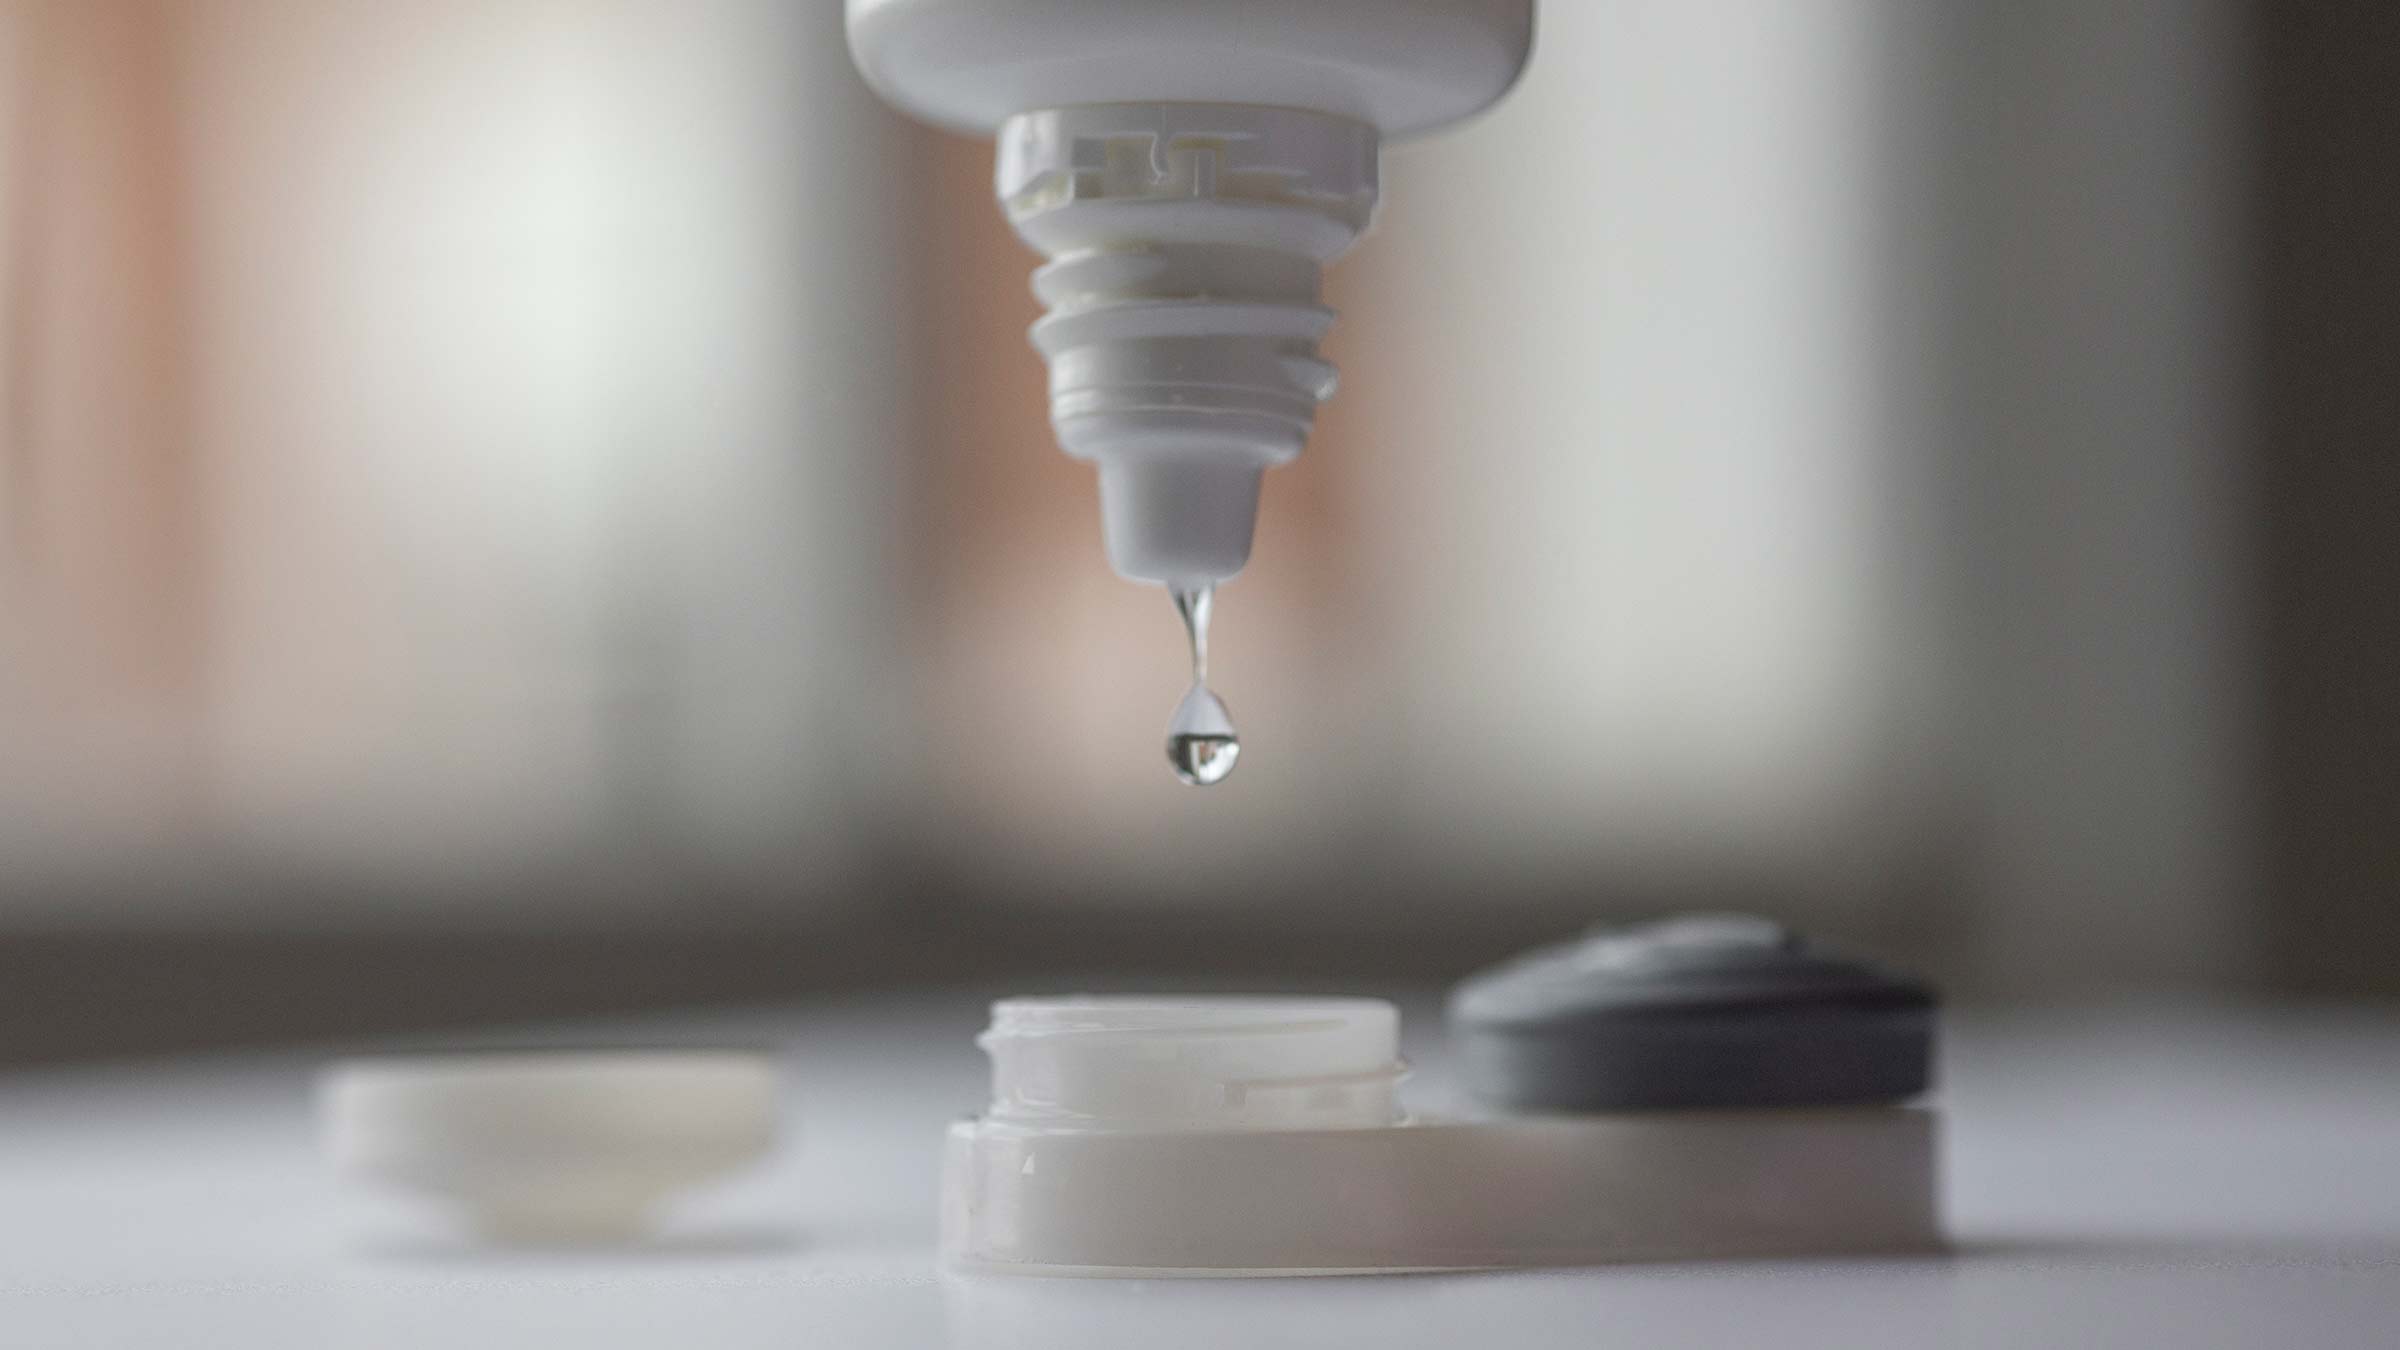 The contact lens mistakes you might be making, and other important eye health tips